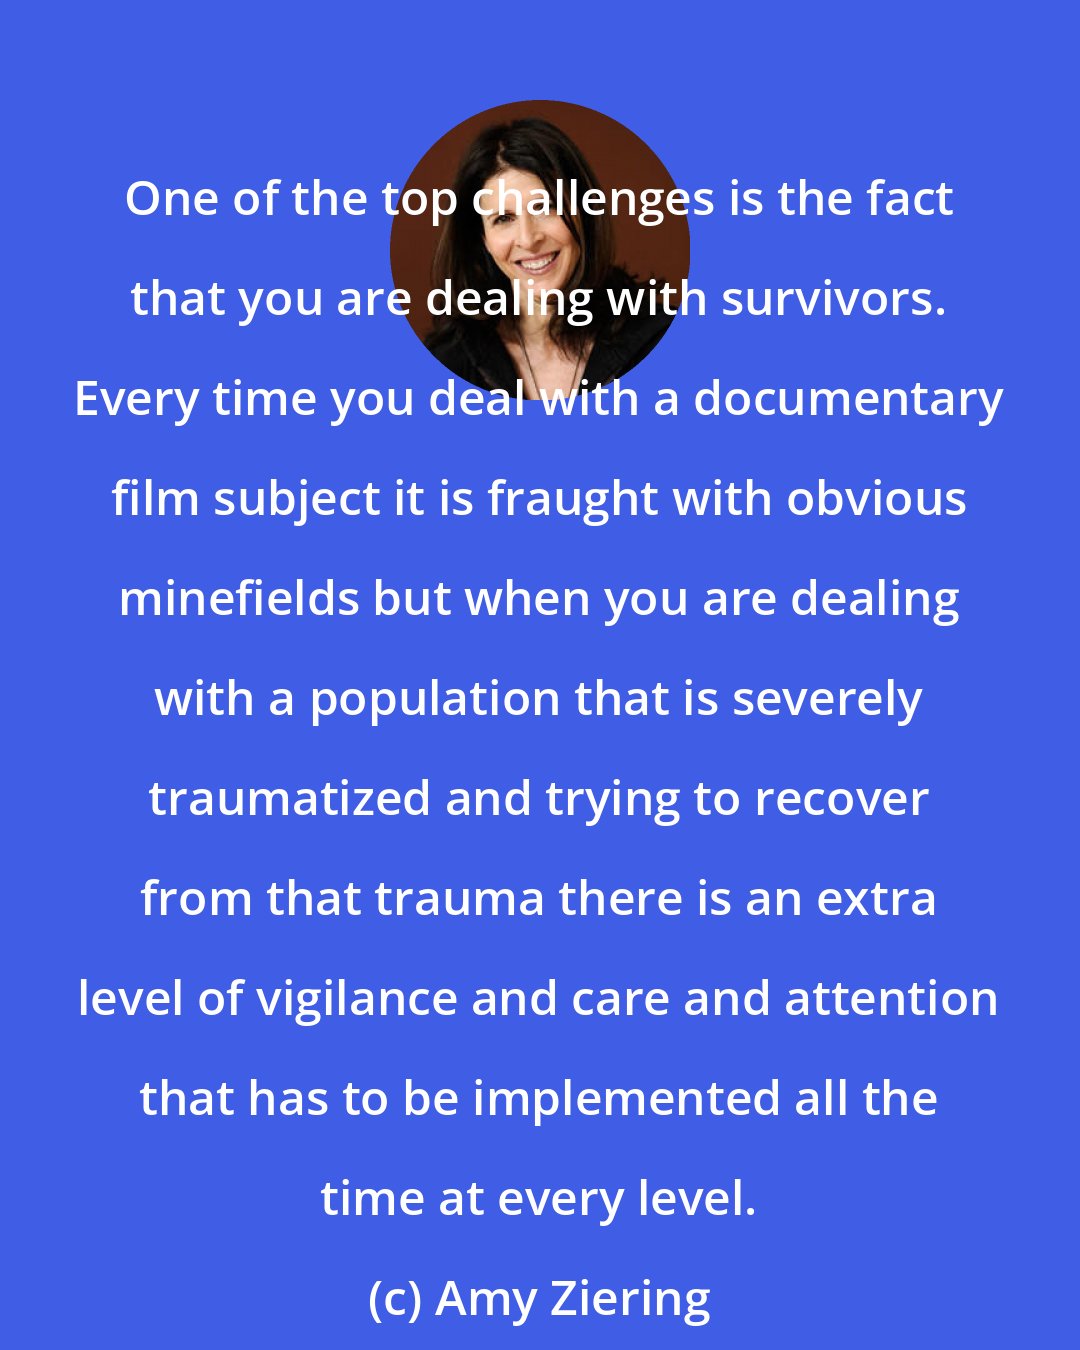 Amy Ziering: One of the top challenges is the fact that you are dealing with survivors. Every time you deal with a documentary film subject it is fraught with obvious minefields but when you are dealing with a population that is severely traumatized and trying to recover from that trauma there is an extra level of vigilance and care and attention that has to be implemented all the time at every level.